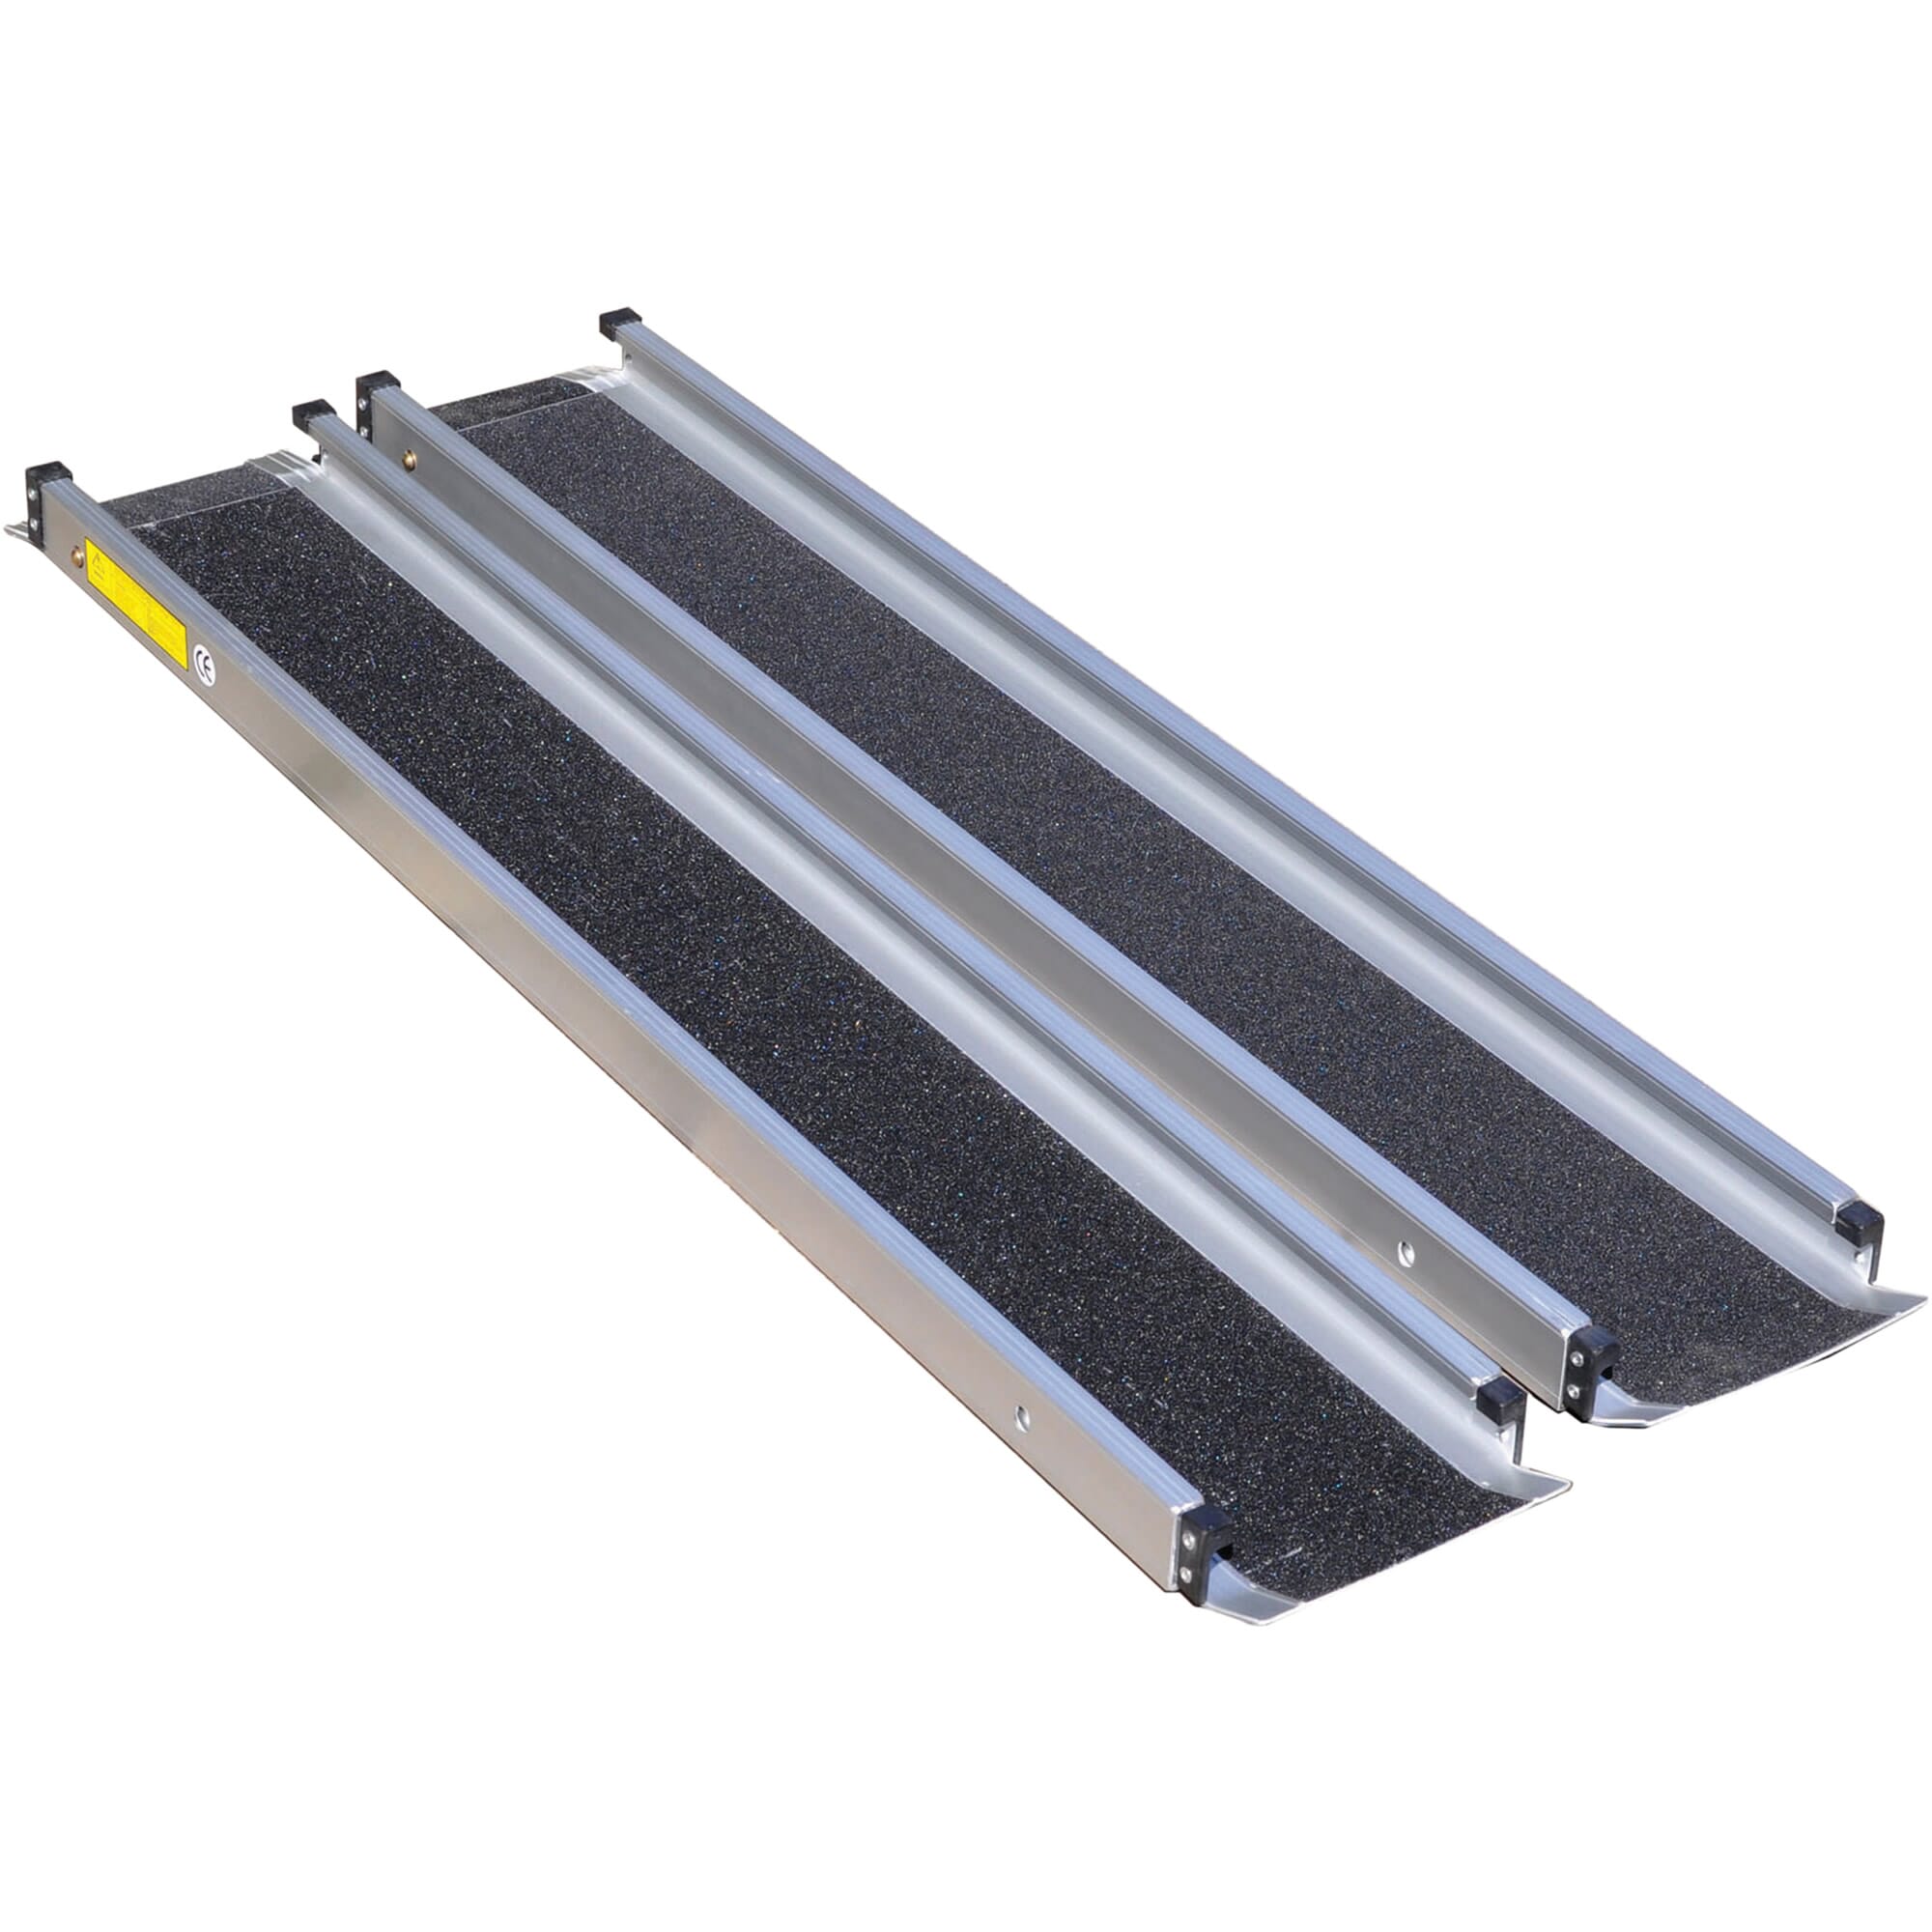 View Telescopic NonSlip Channel Ramps 4ft information